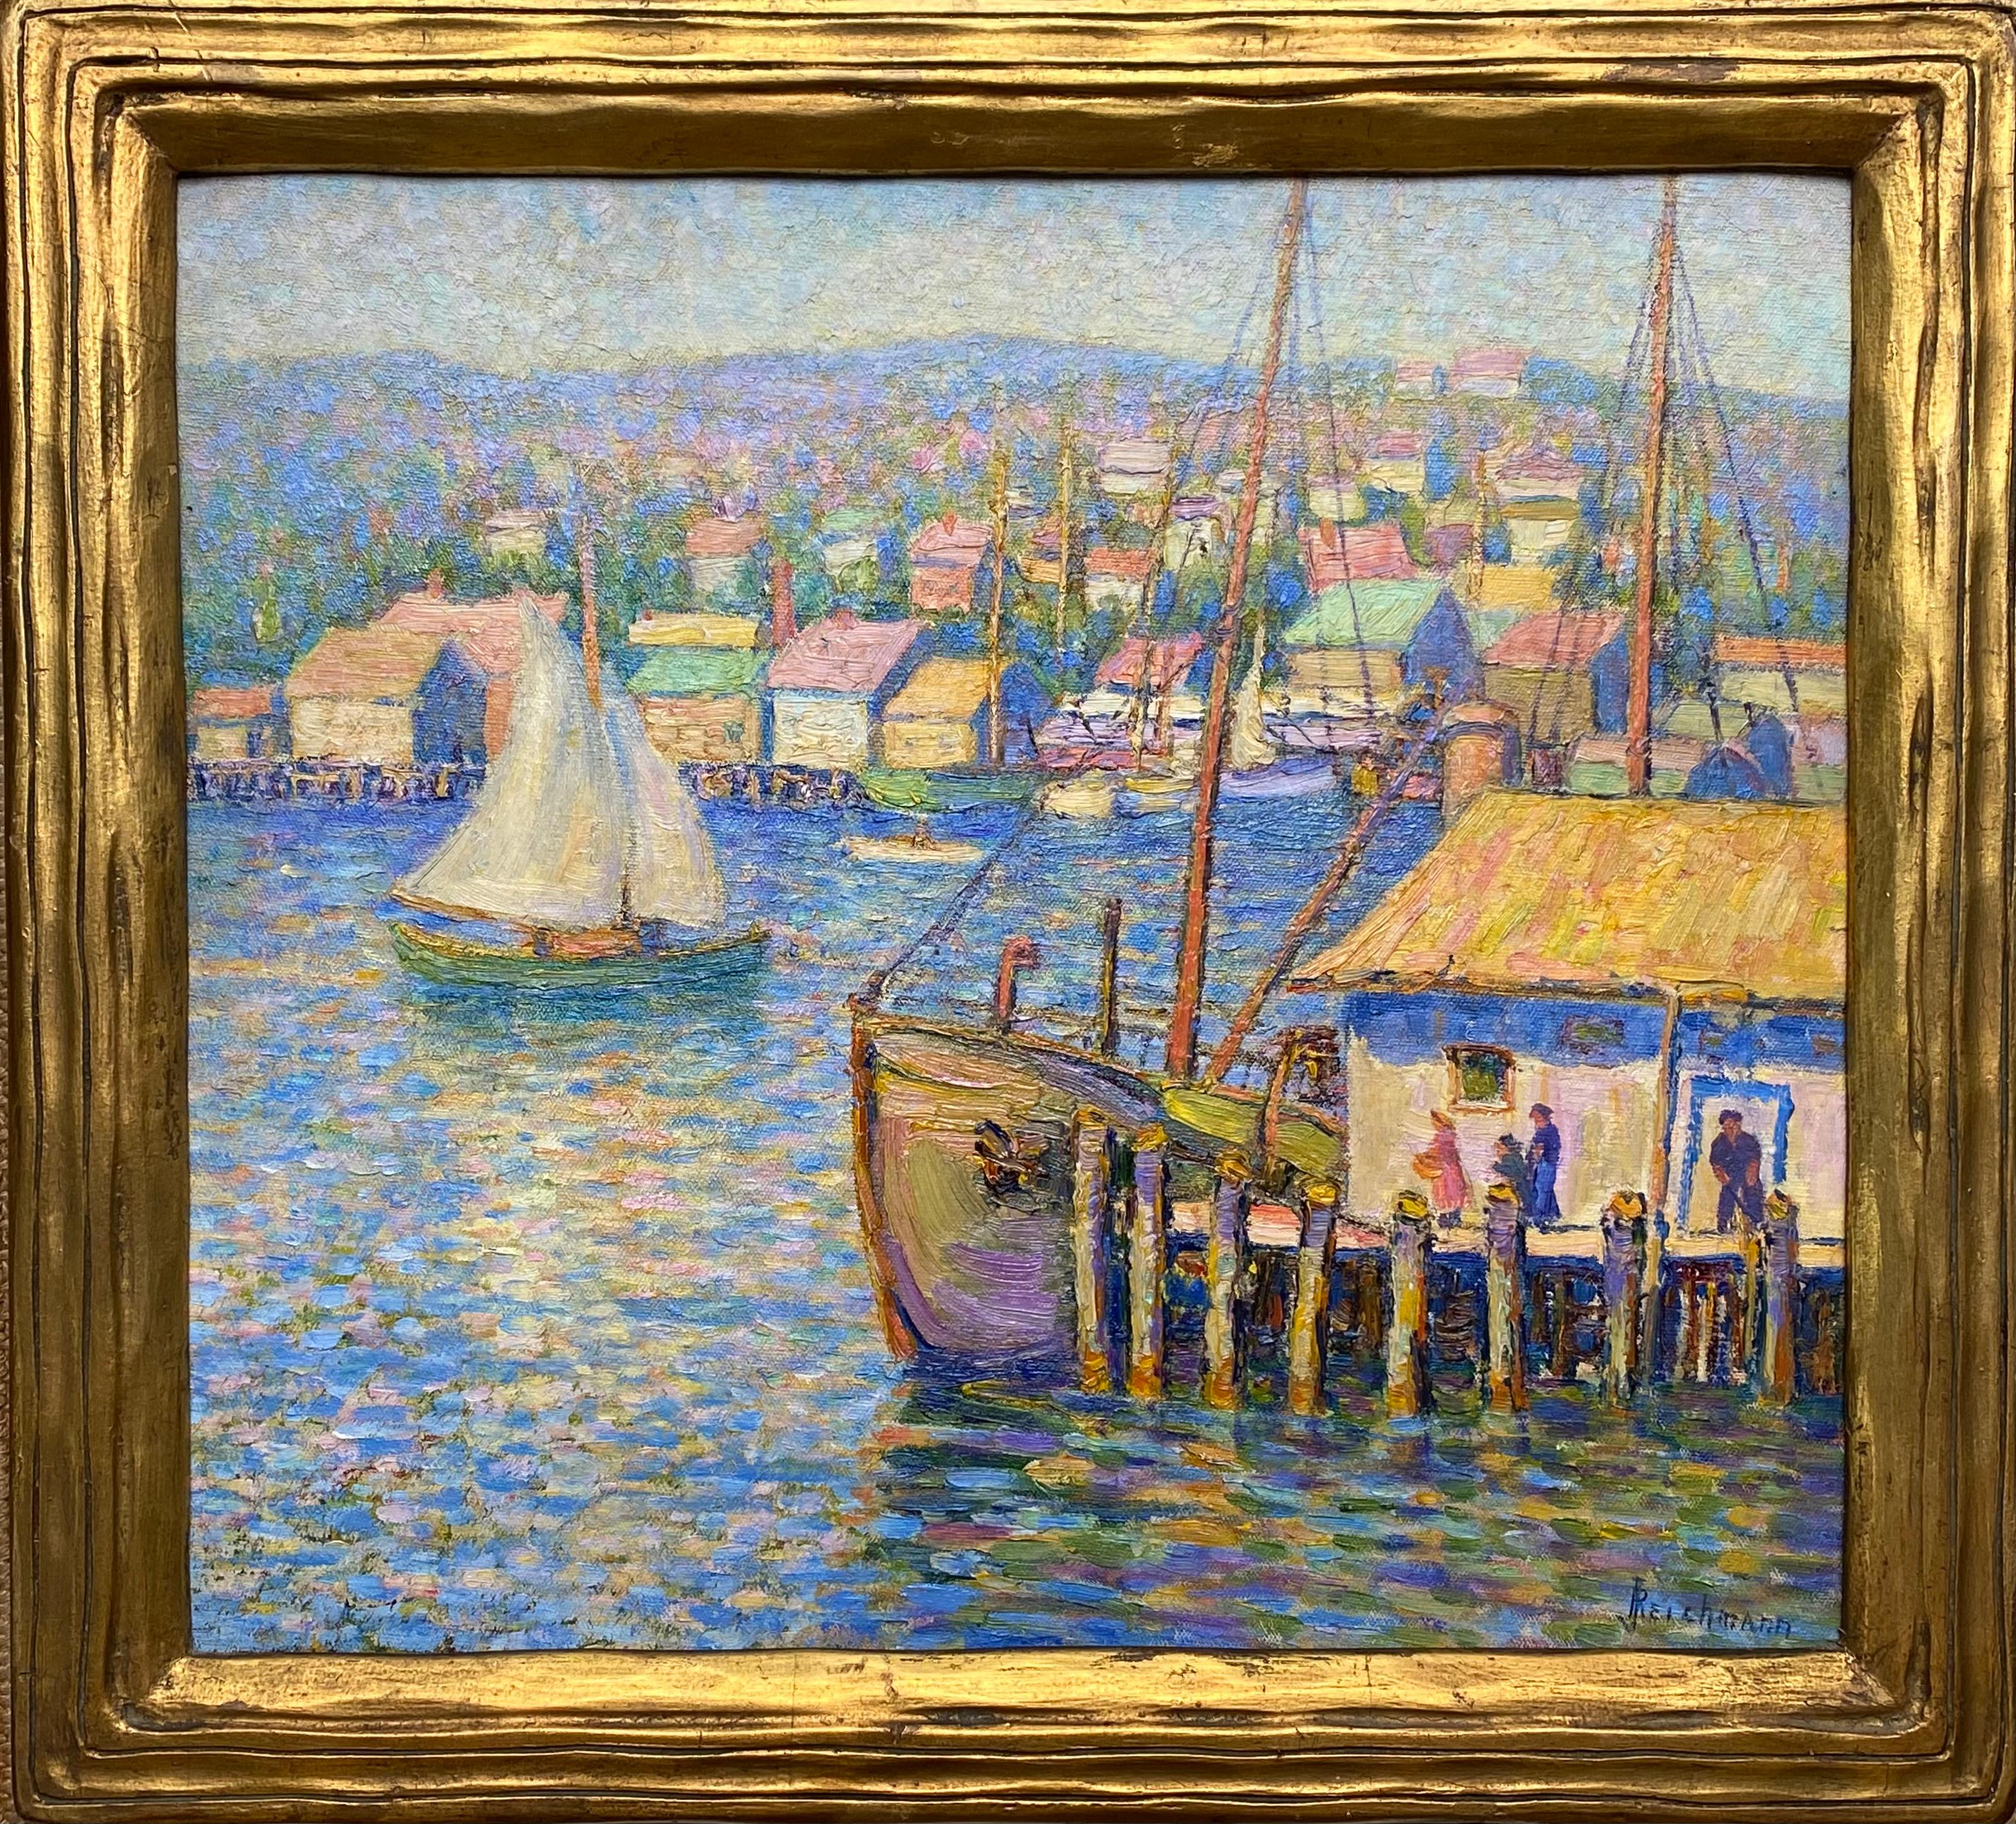 “Gloucester Harbor View” - Painting by Josephine Lemos Reichmann